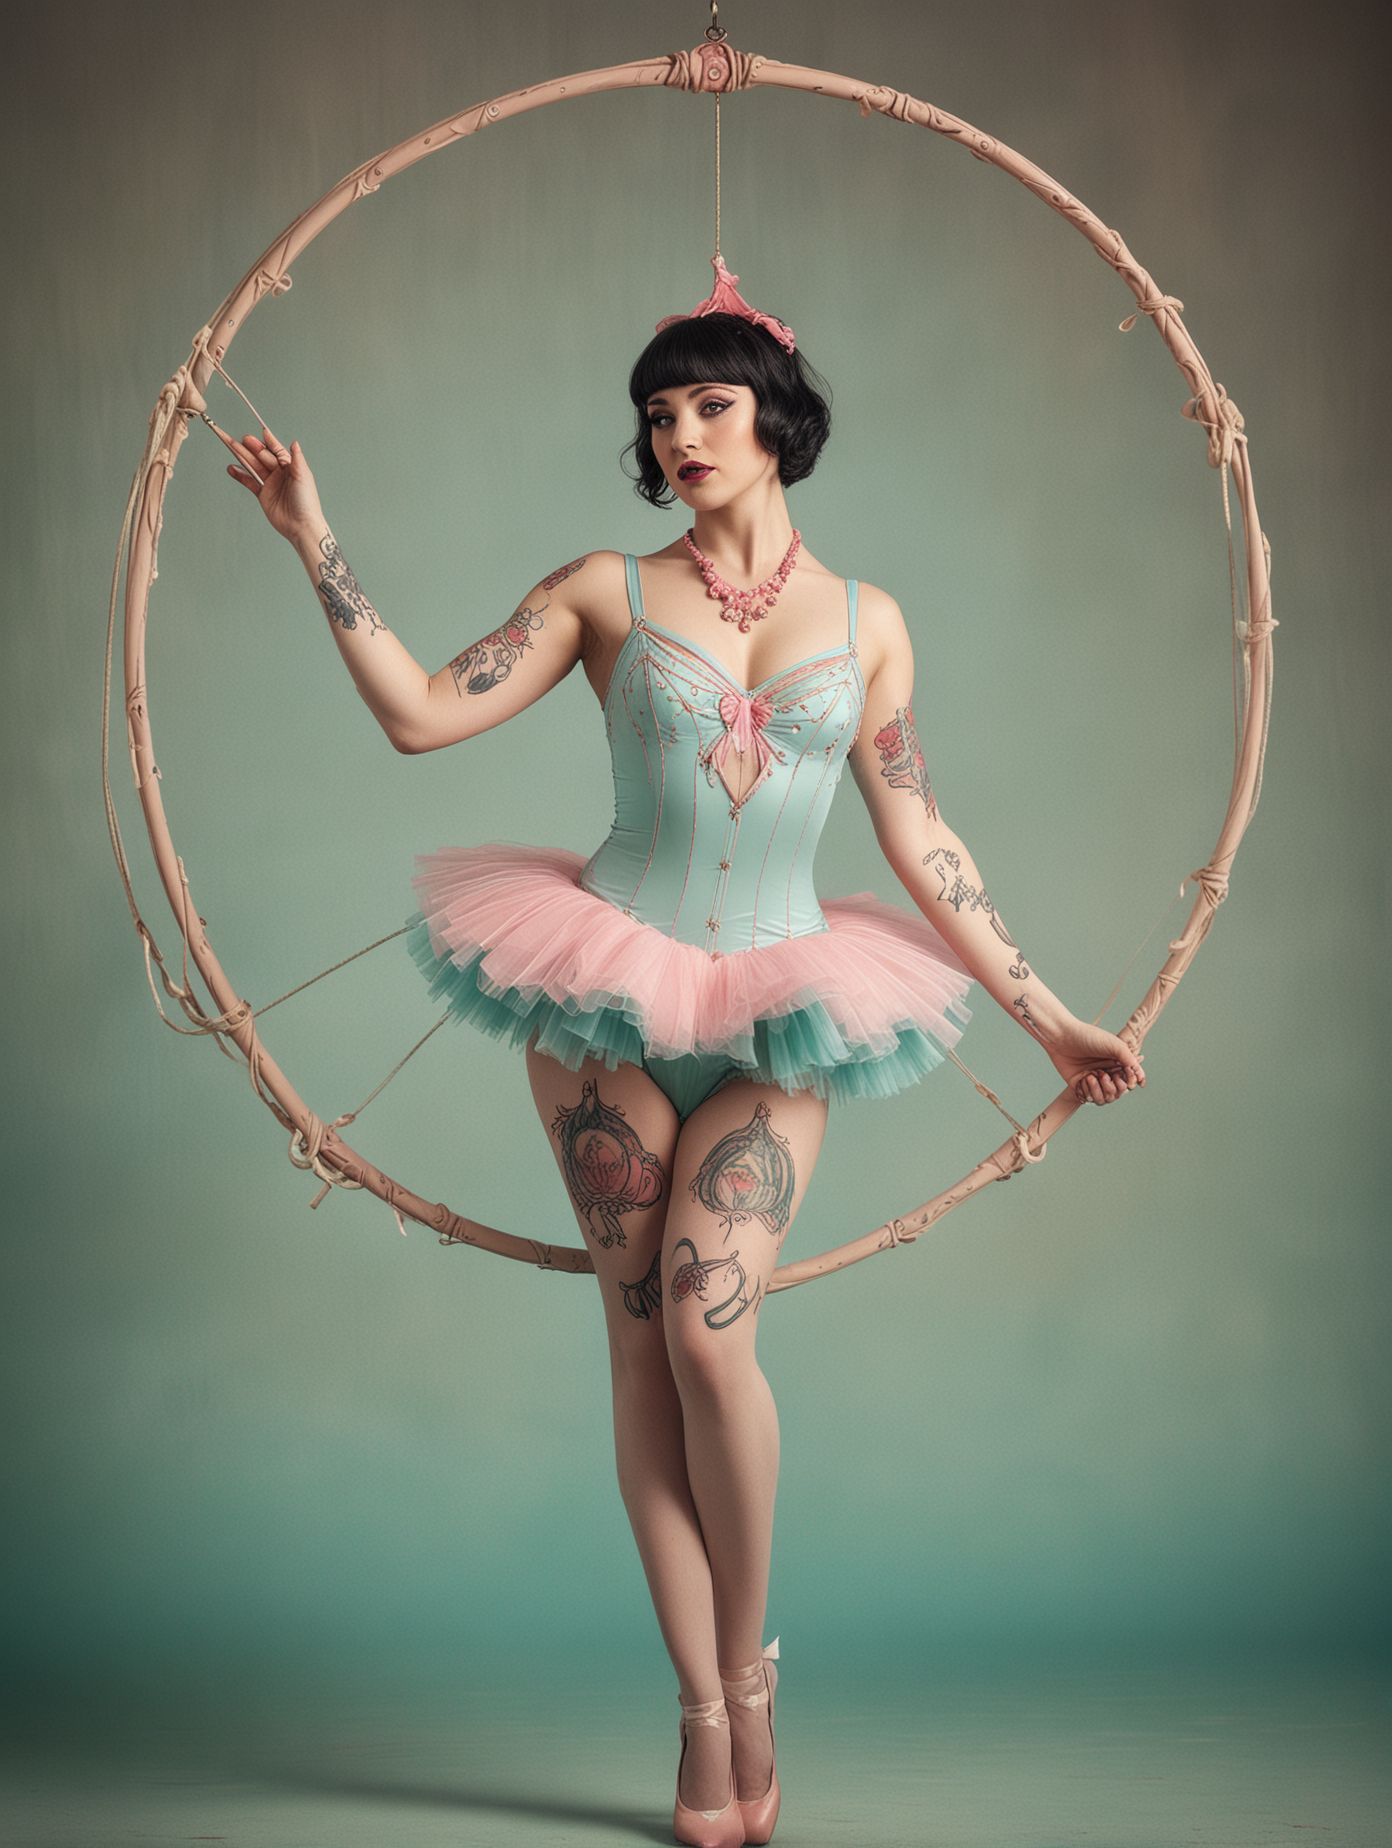 Ethereal Elegance Whimsical 1920s Circus Acrobat in CloseUp Portrait